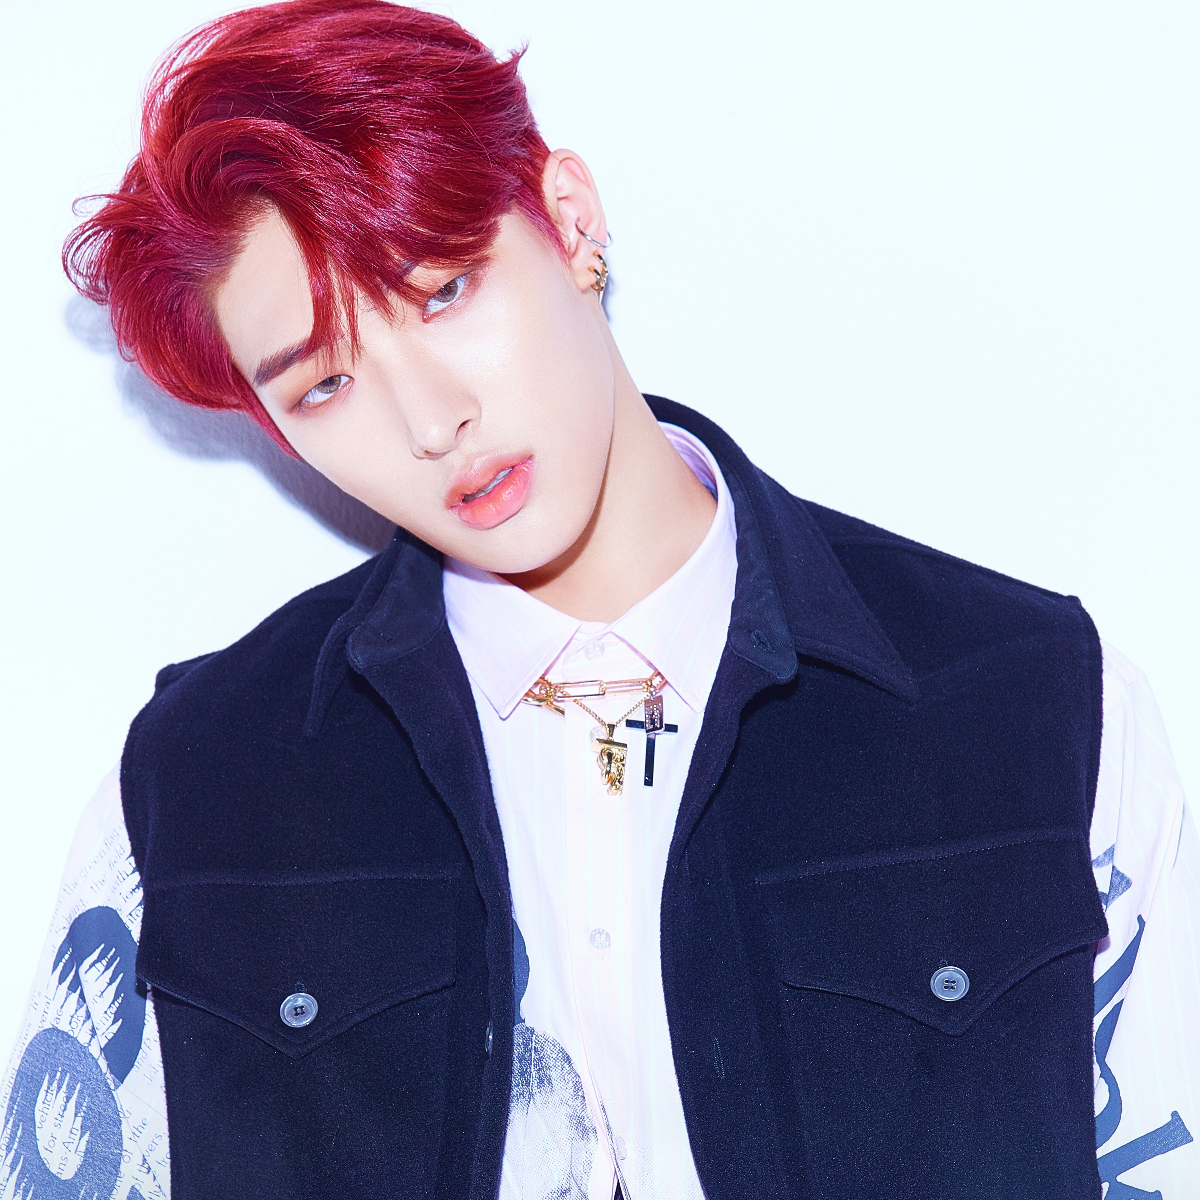 Mingi looks handsome in a concept photo